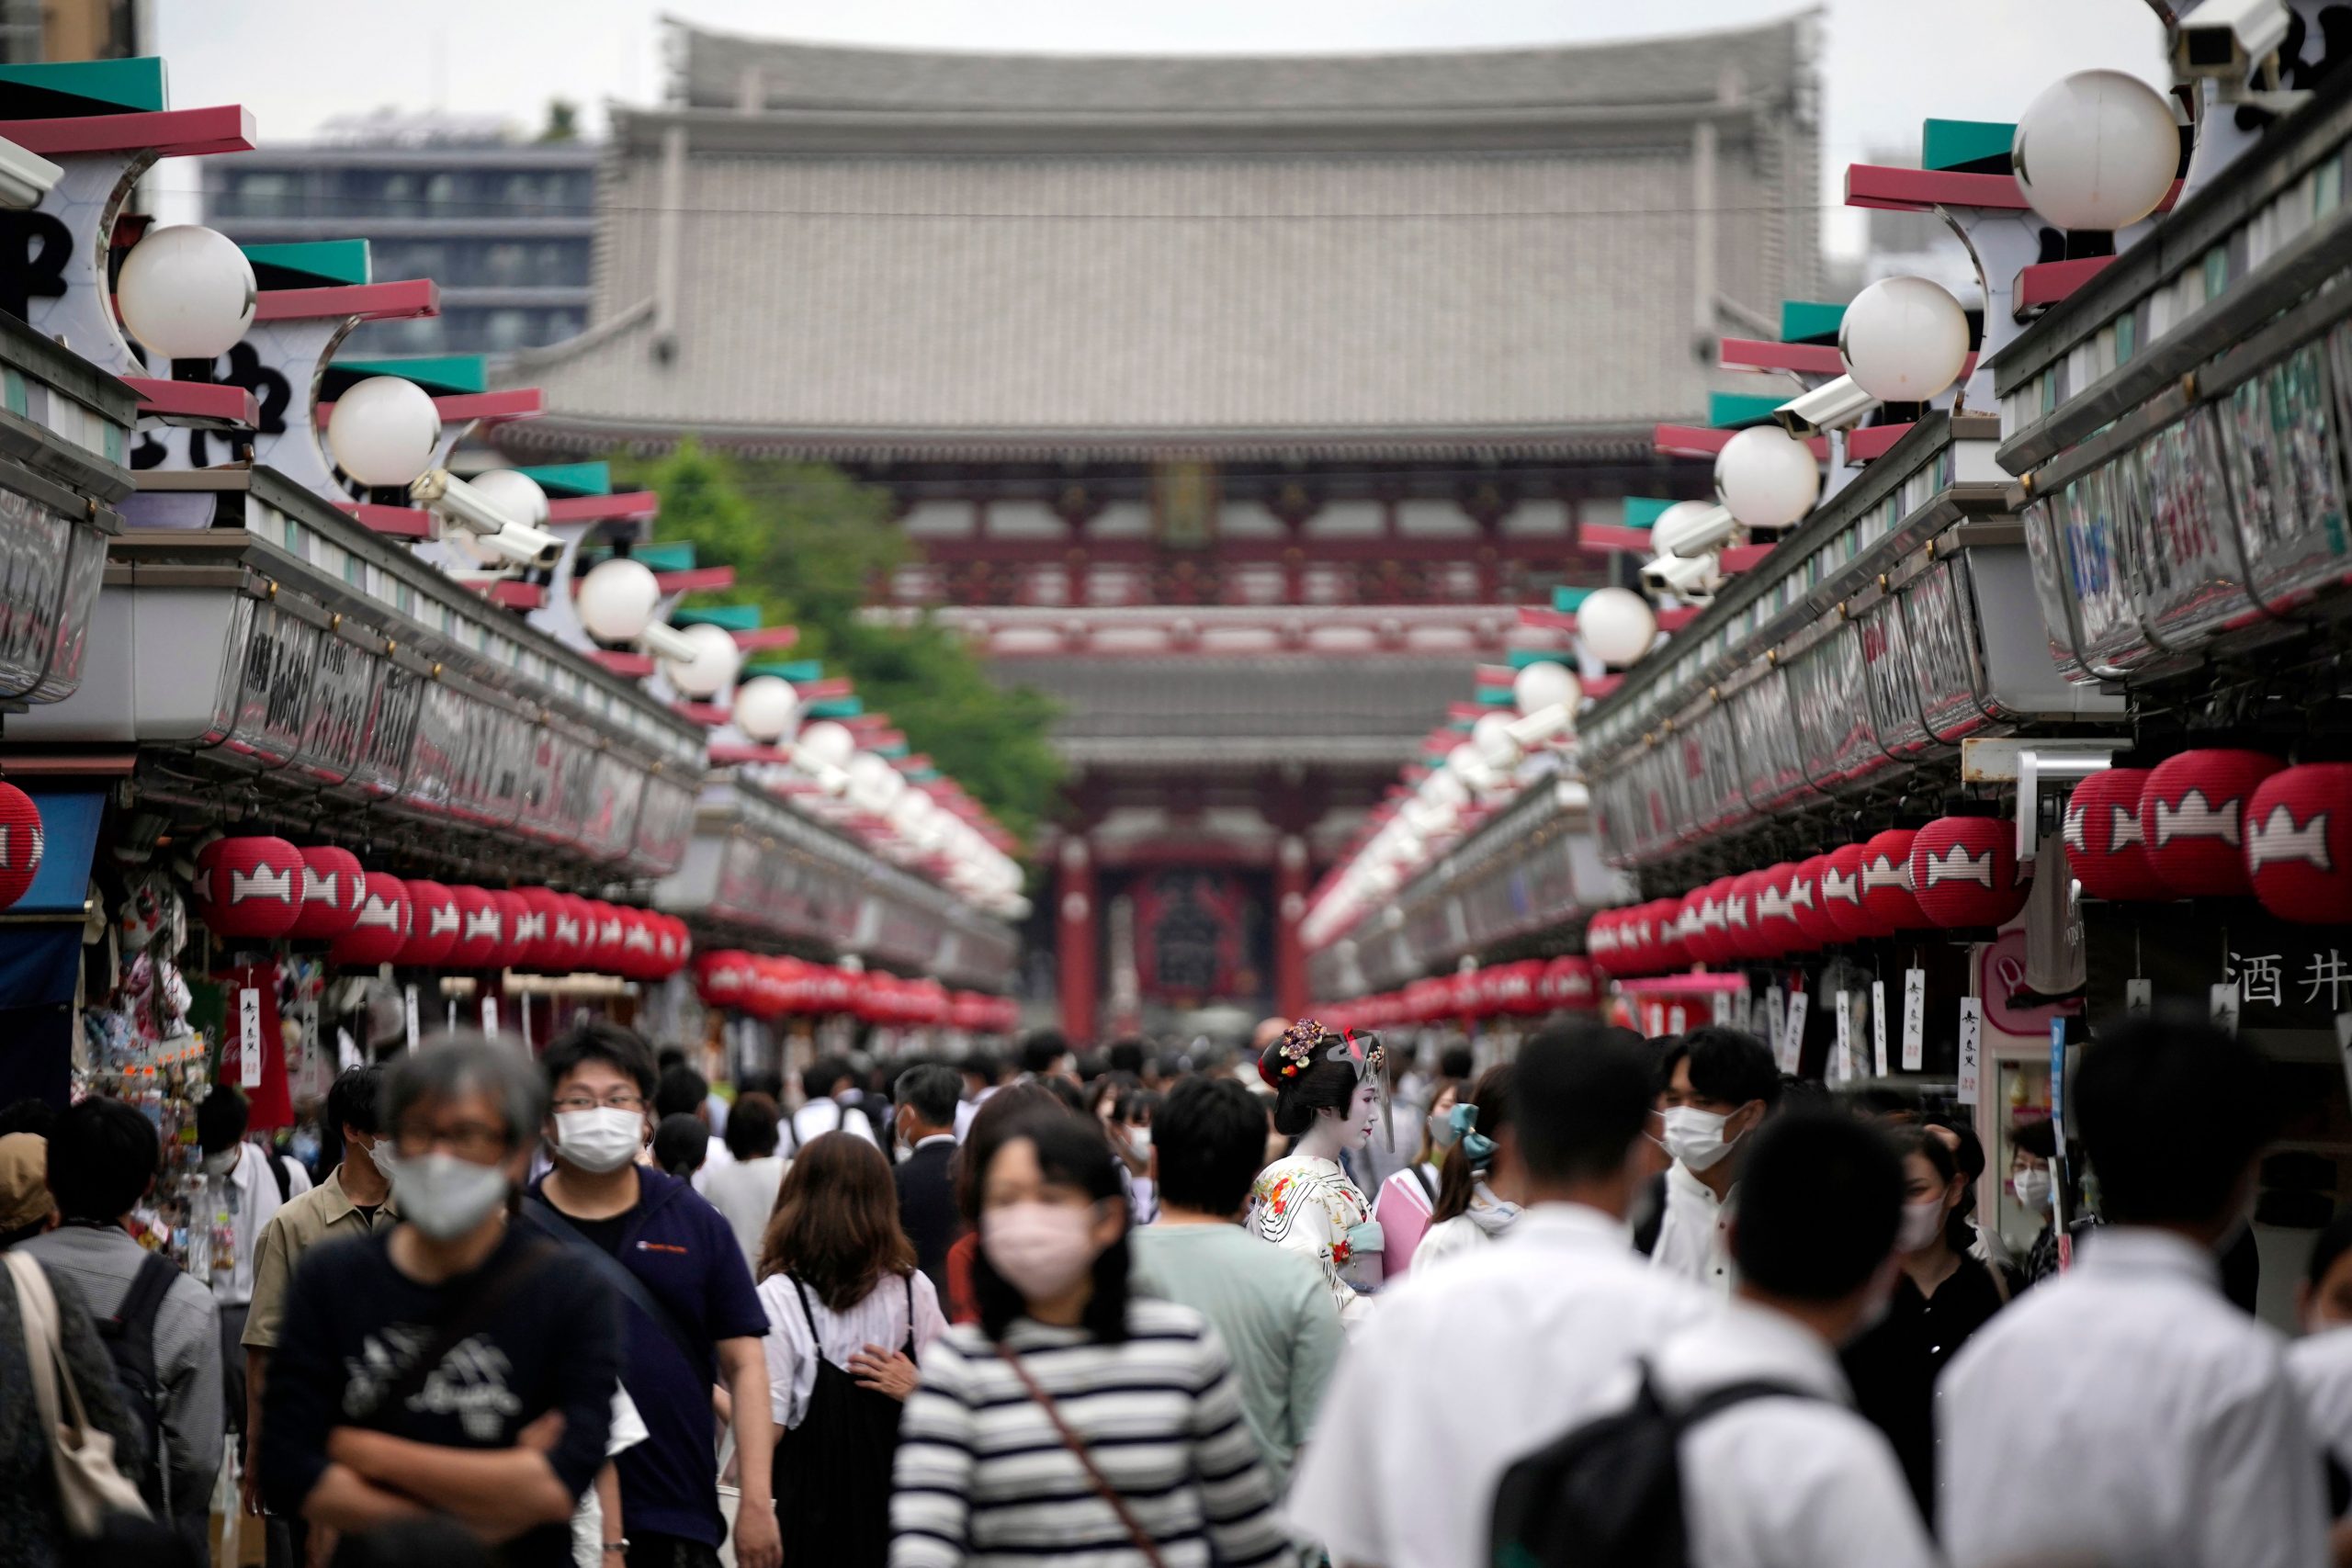 Japan eases border restrictions for foreign tourism, allows guided package tours